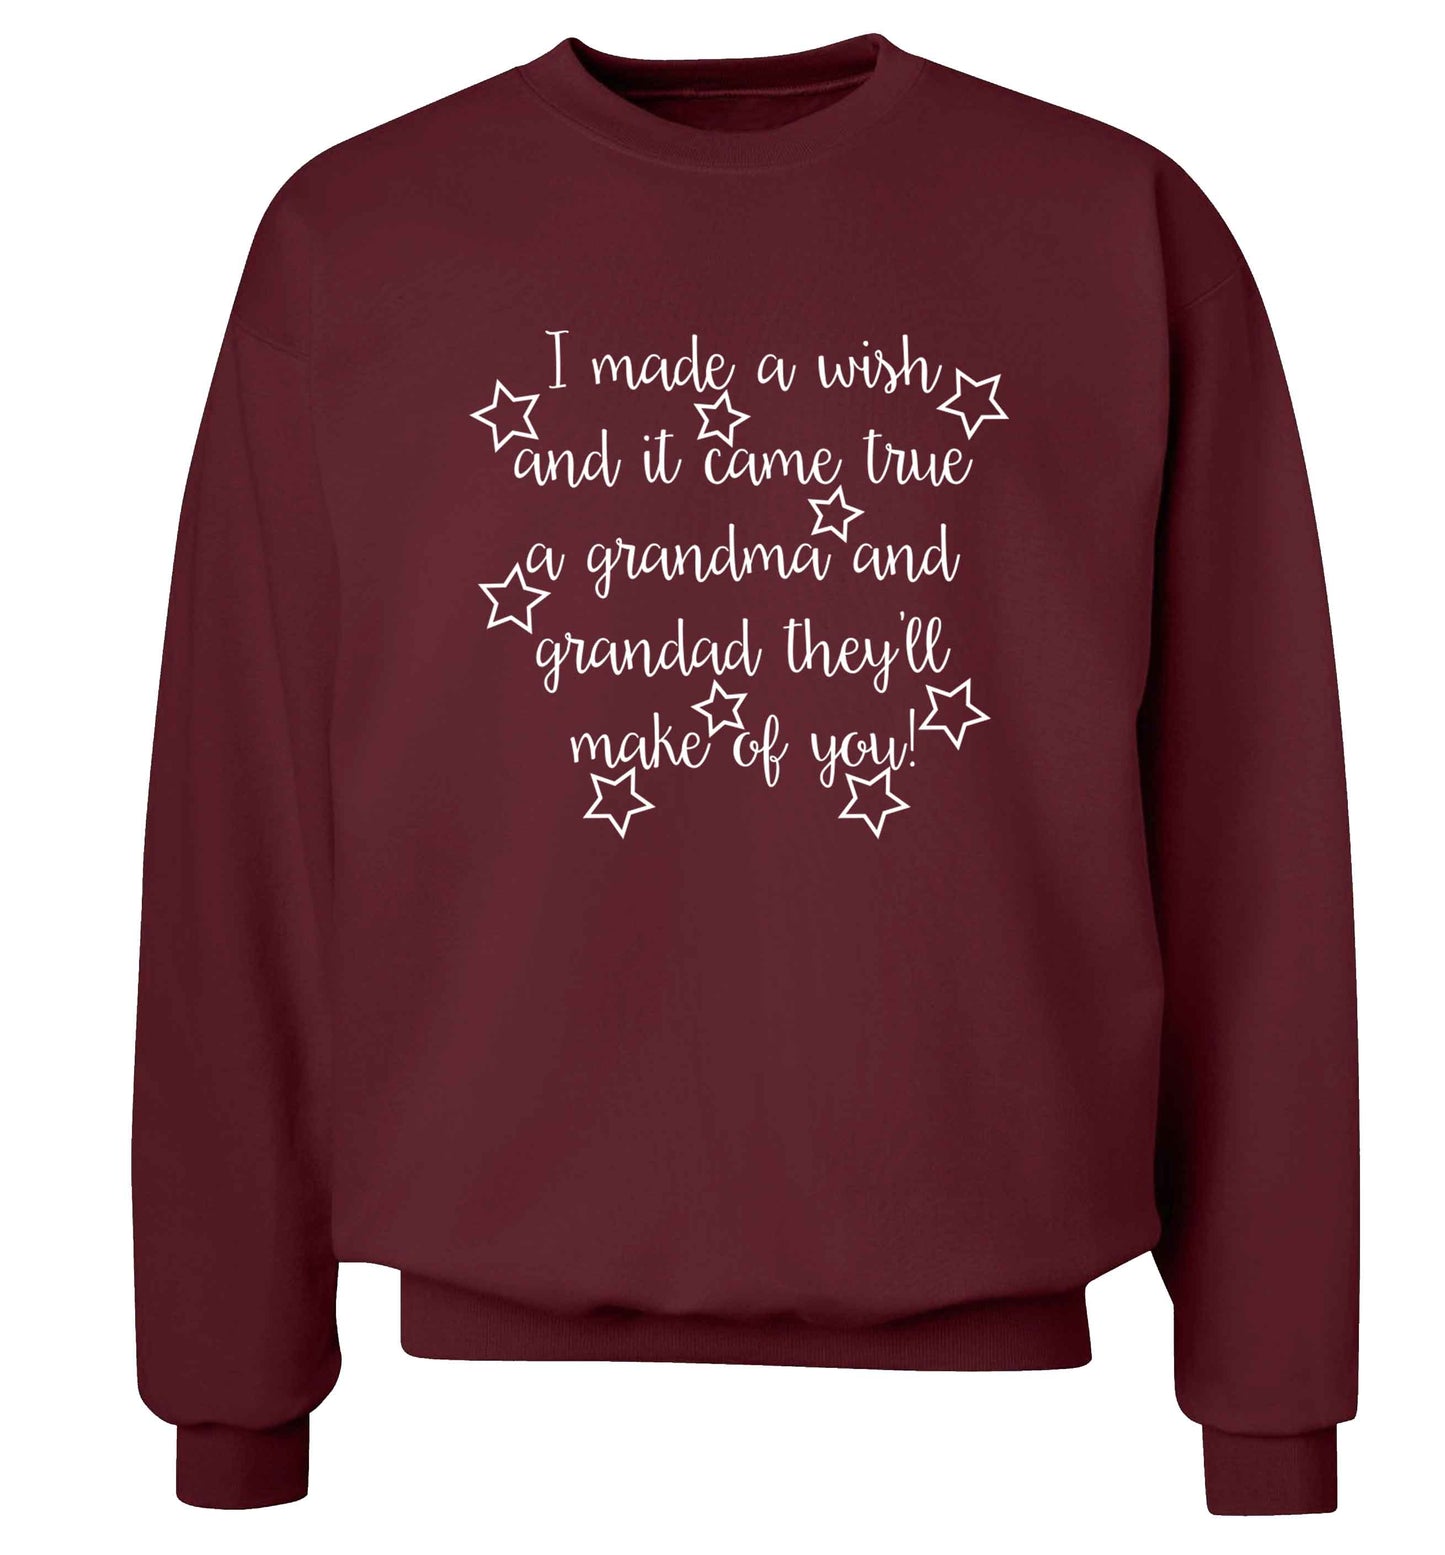 I made a wish and it came true a grandma and grandad they'll make of you! Adult's unisex maroon Sweater 2XL